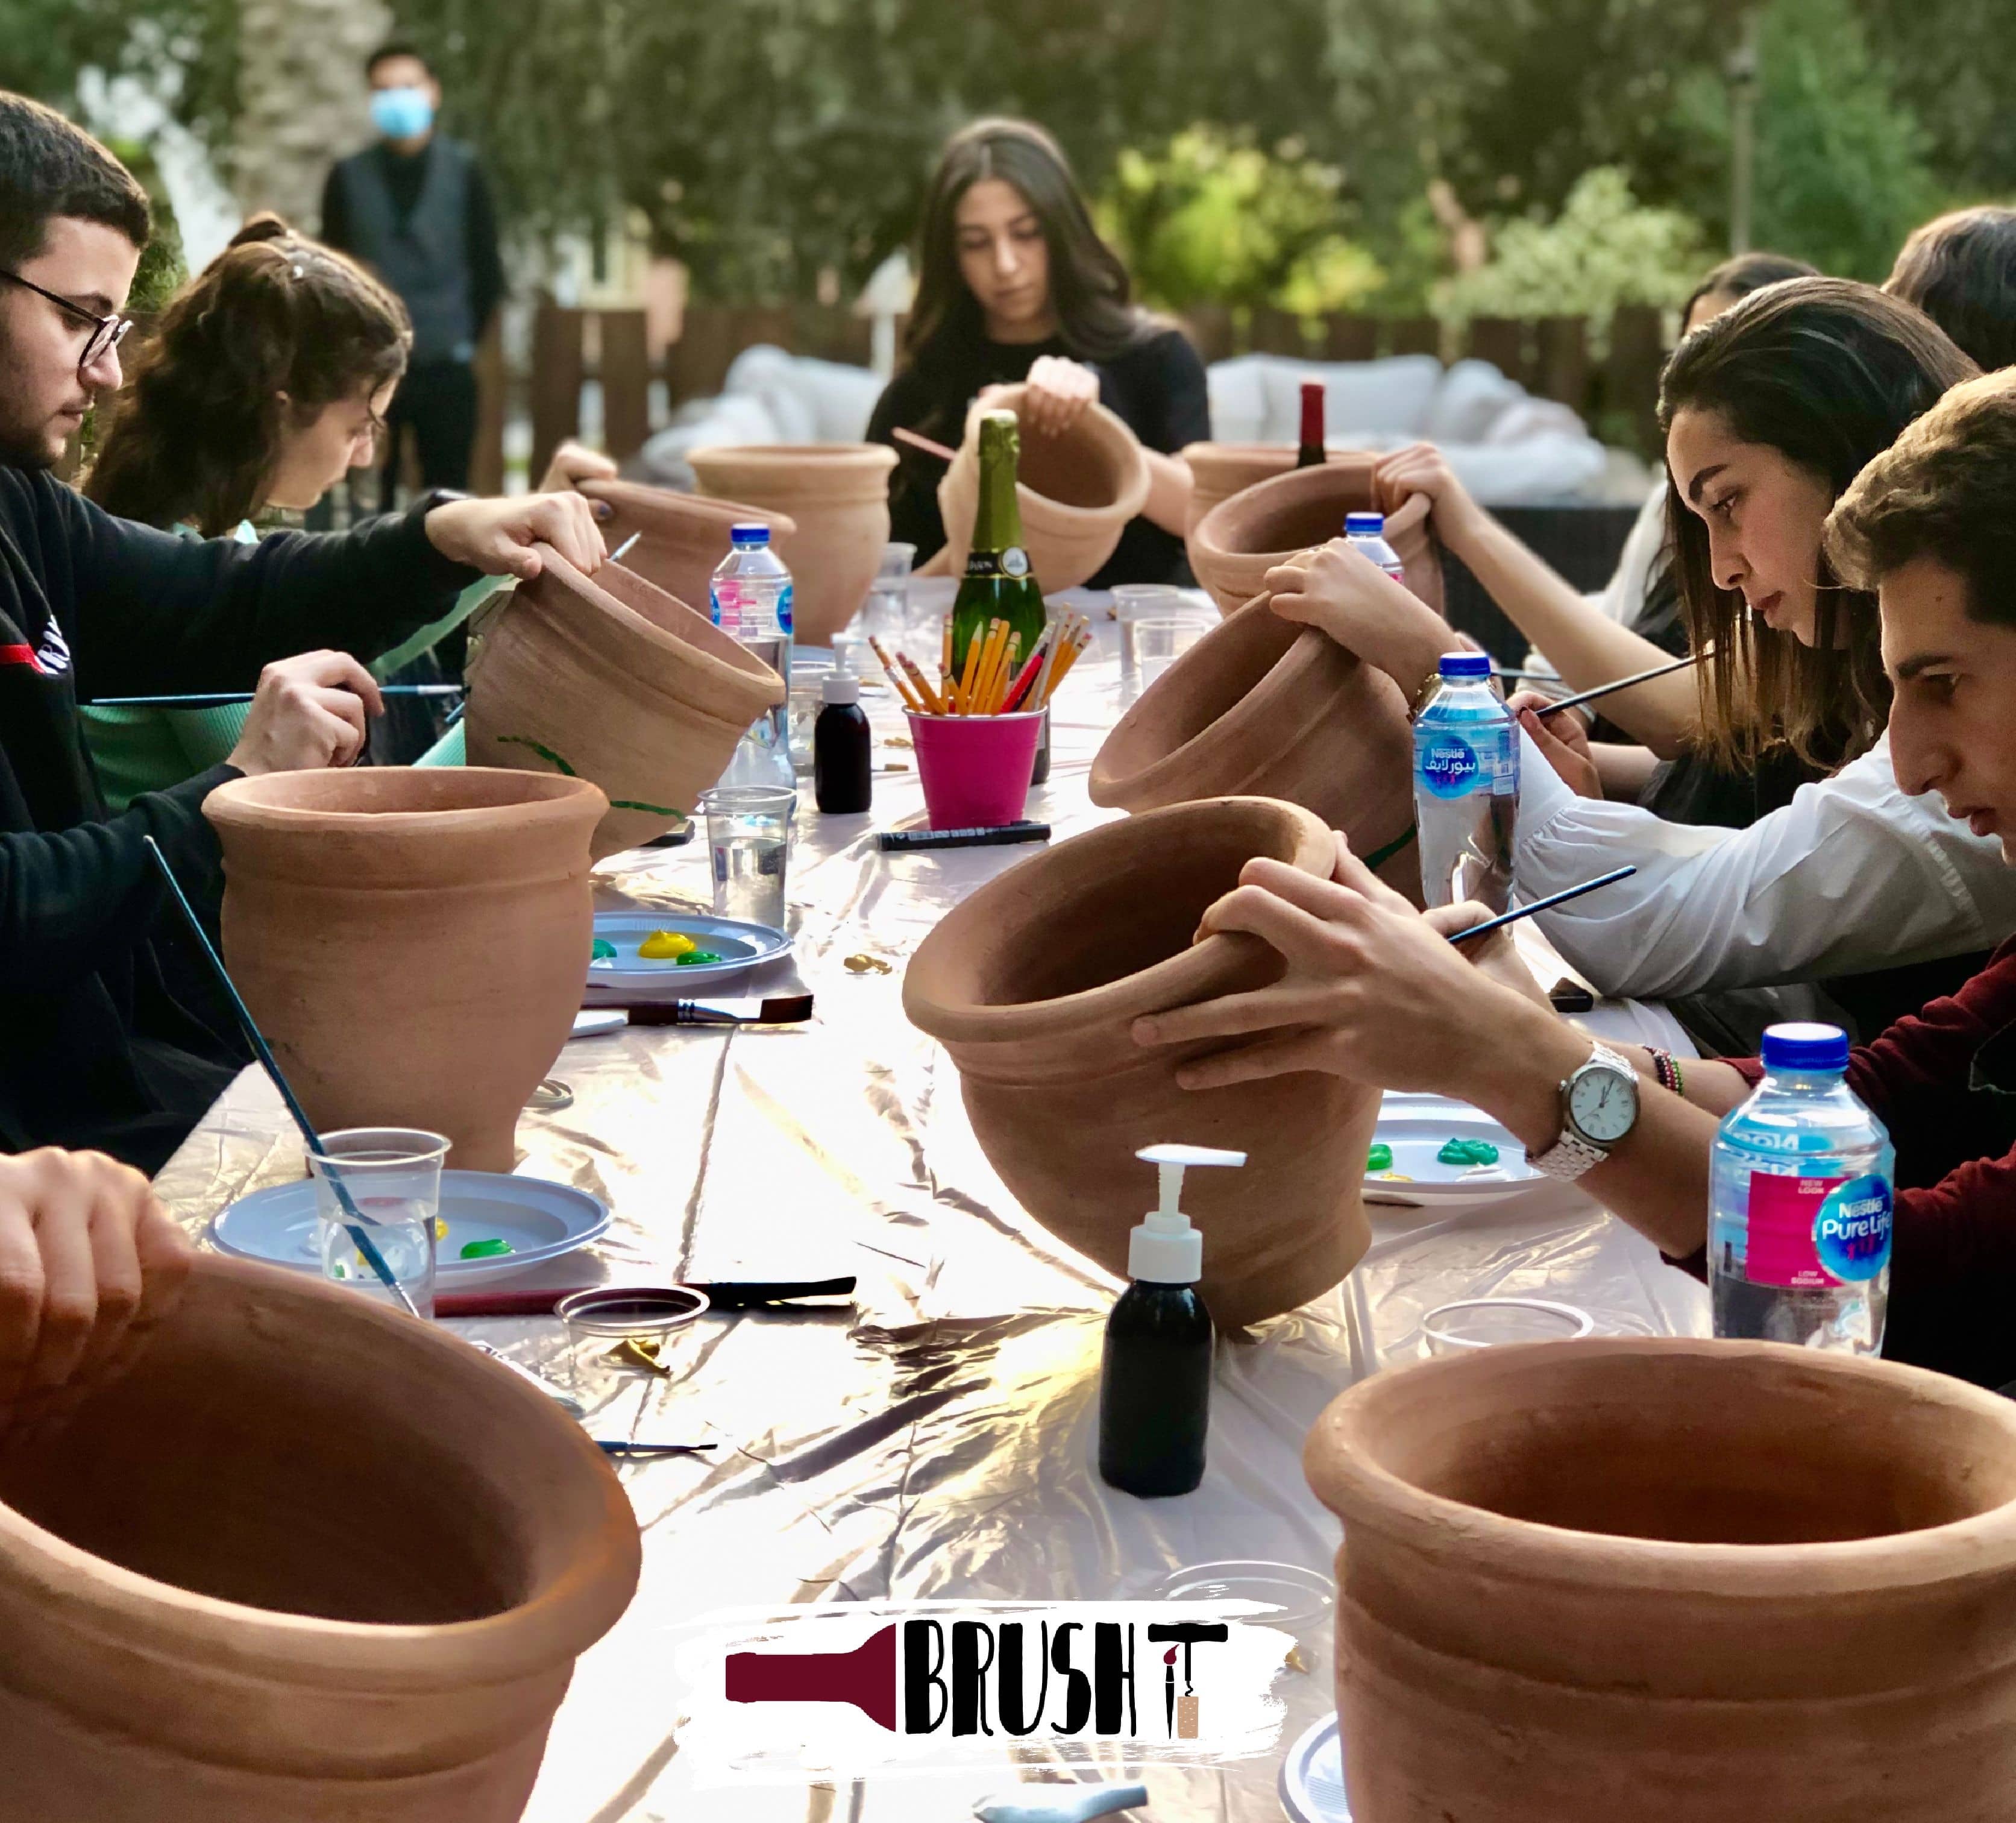 *POTTERY* TUESDAY, October 12th - 6:00 pm - 8:00 pm - NEW CAIRO - ORA RESTOBAR